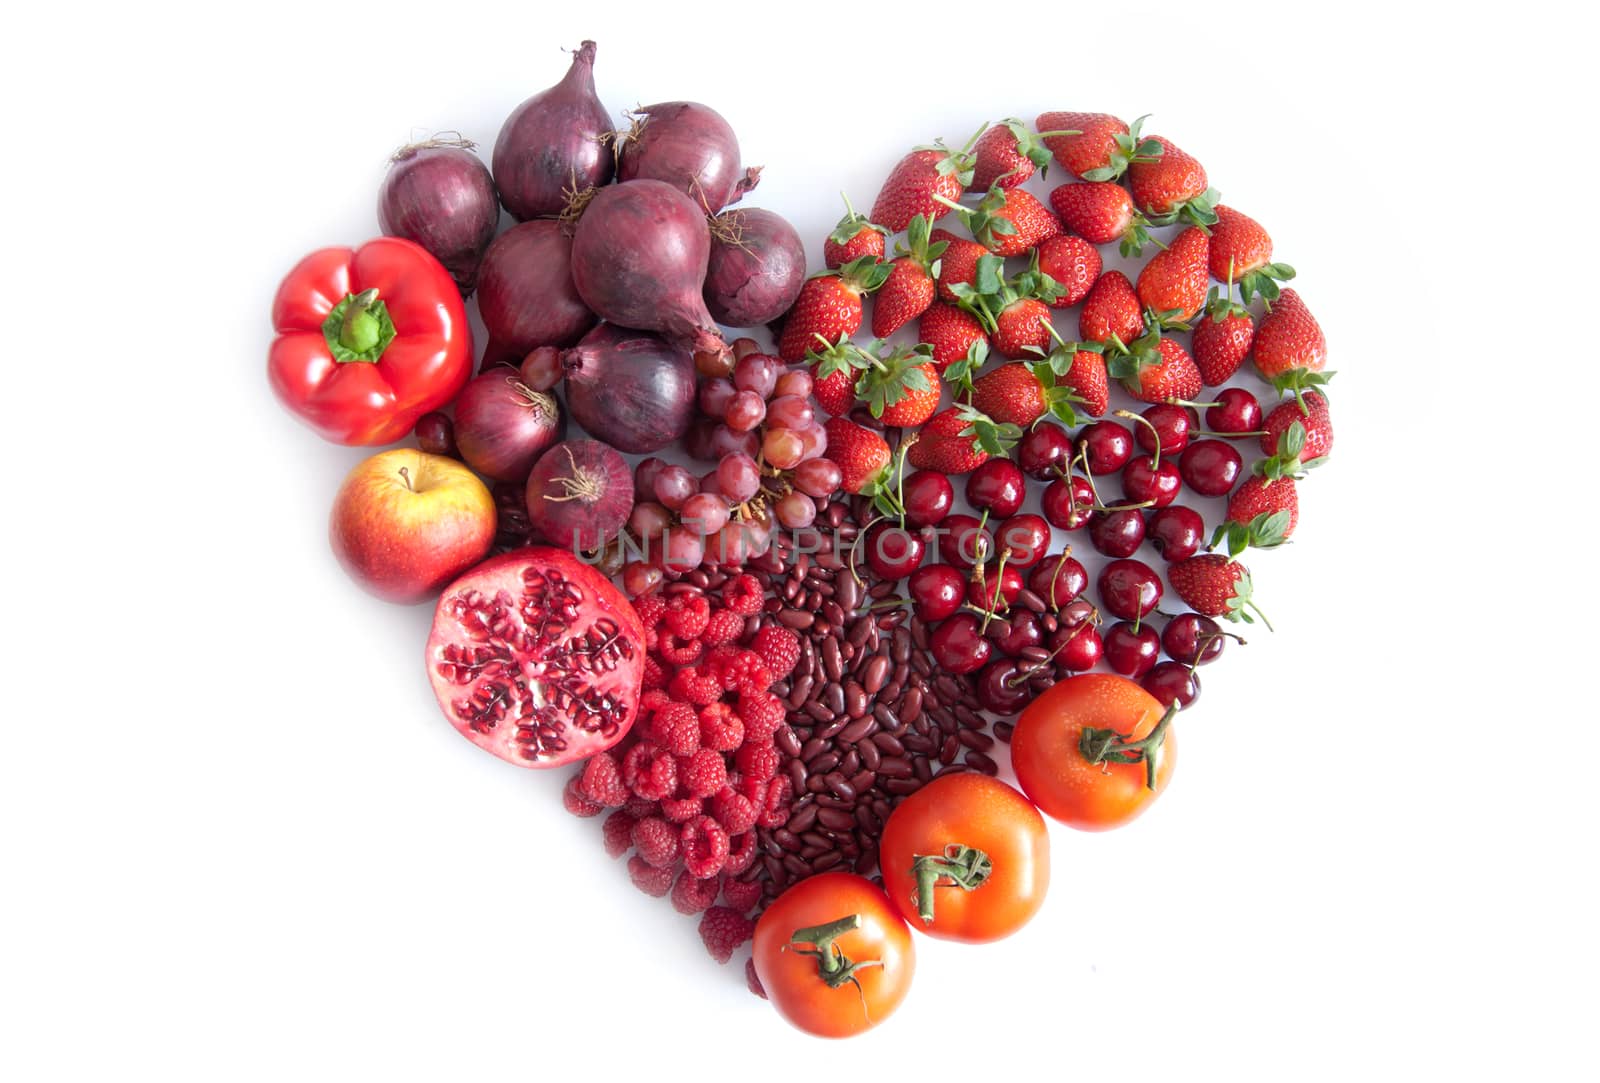 Red heartshape fruits and vegetables by unikpix